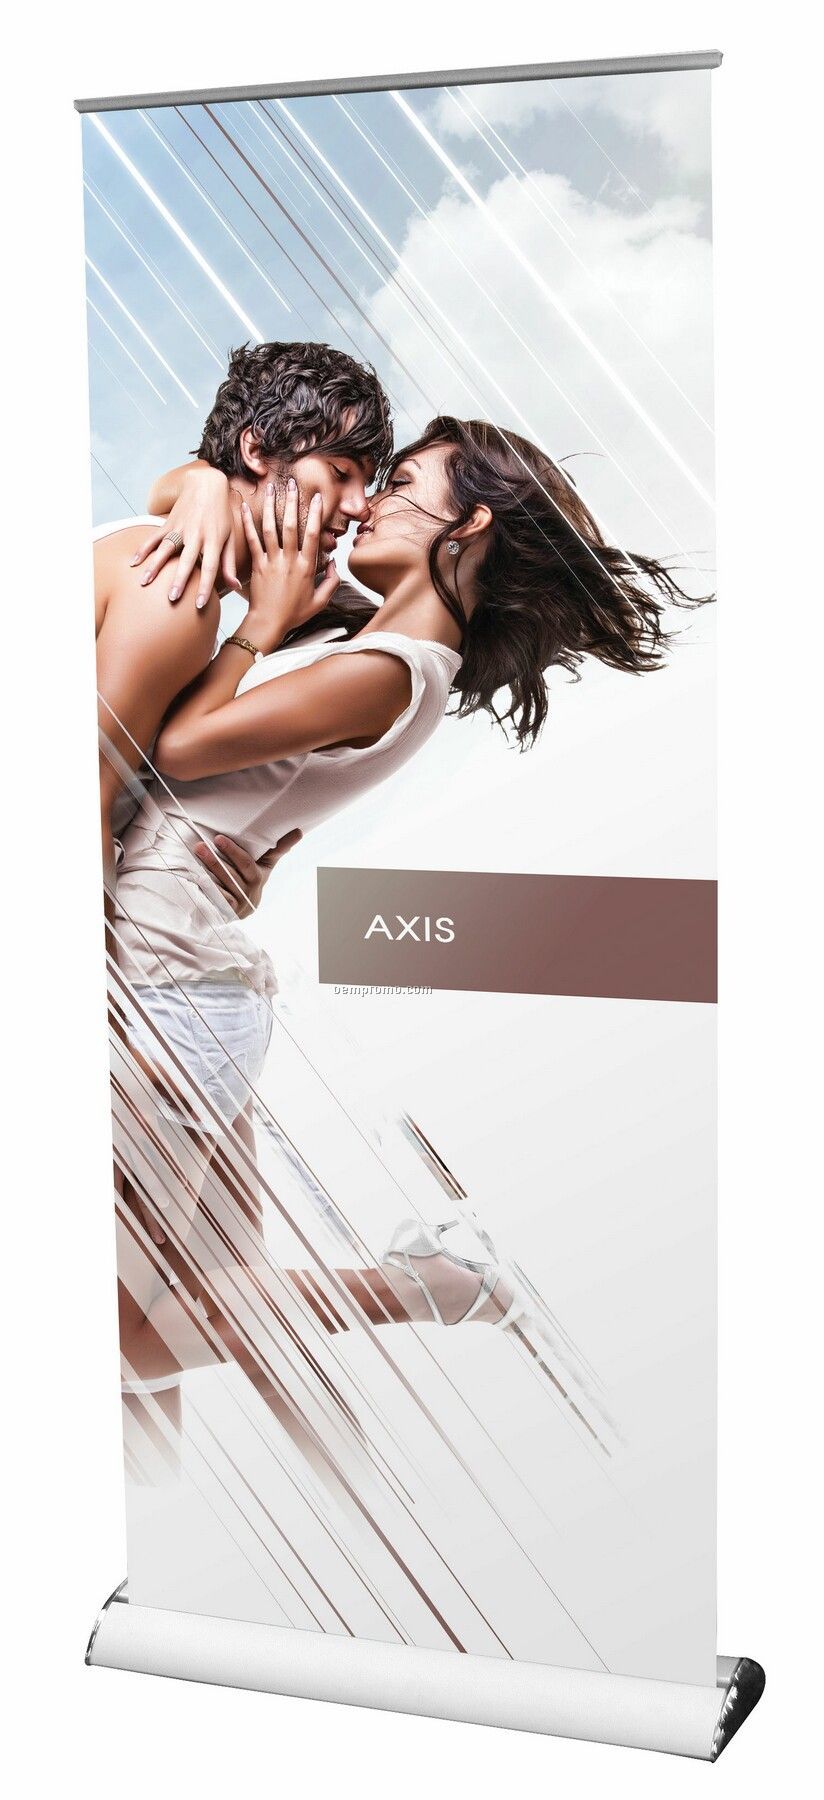 Axis Bannerstand (39.4